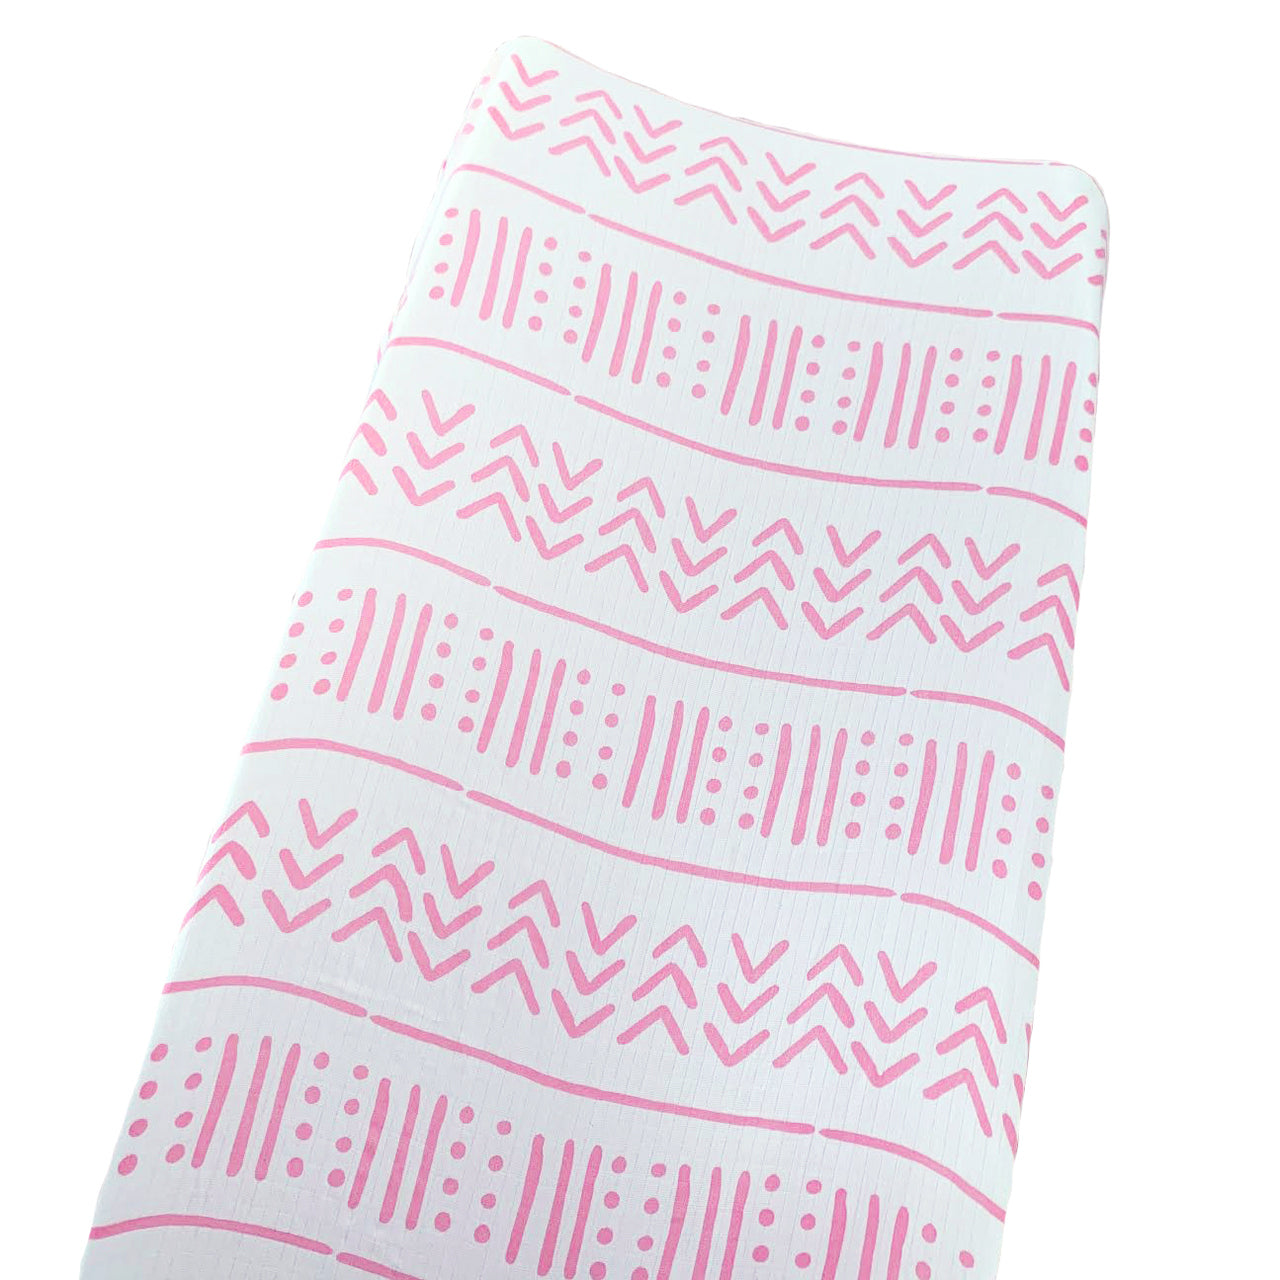 SpearmintLOVE’s baby Muslin Changing Pad Cover, White/Pink Mudcloth